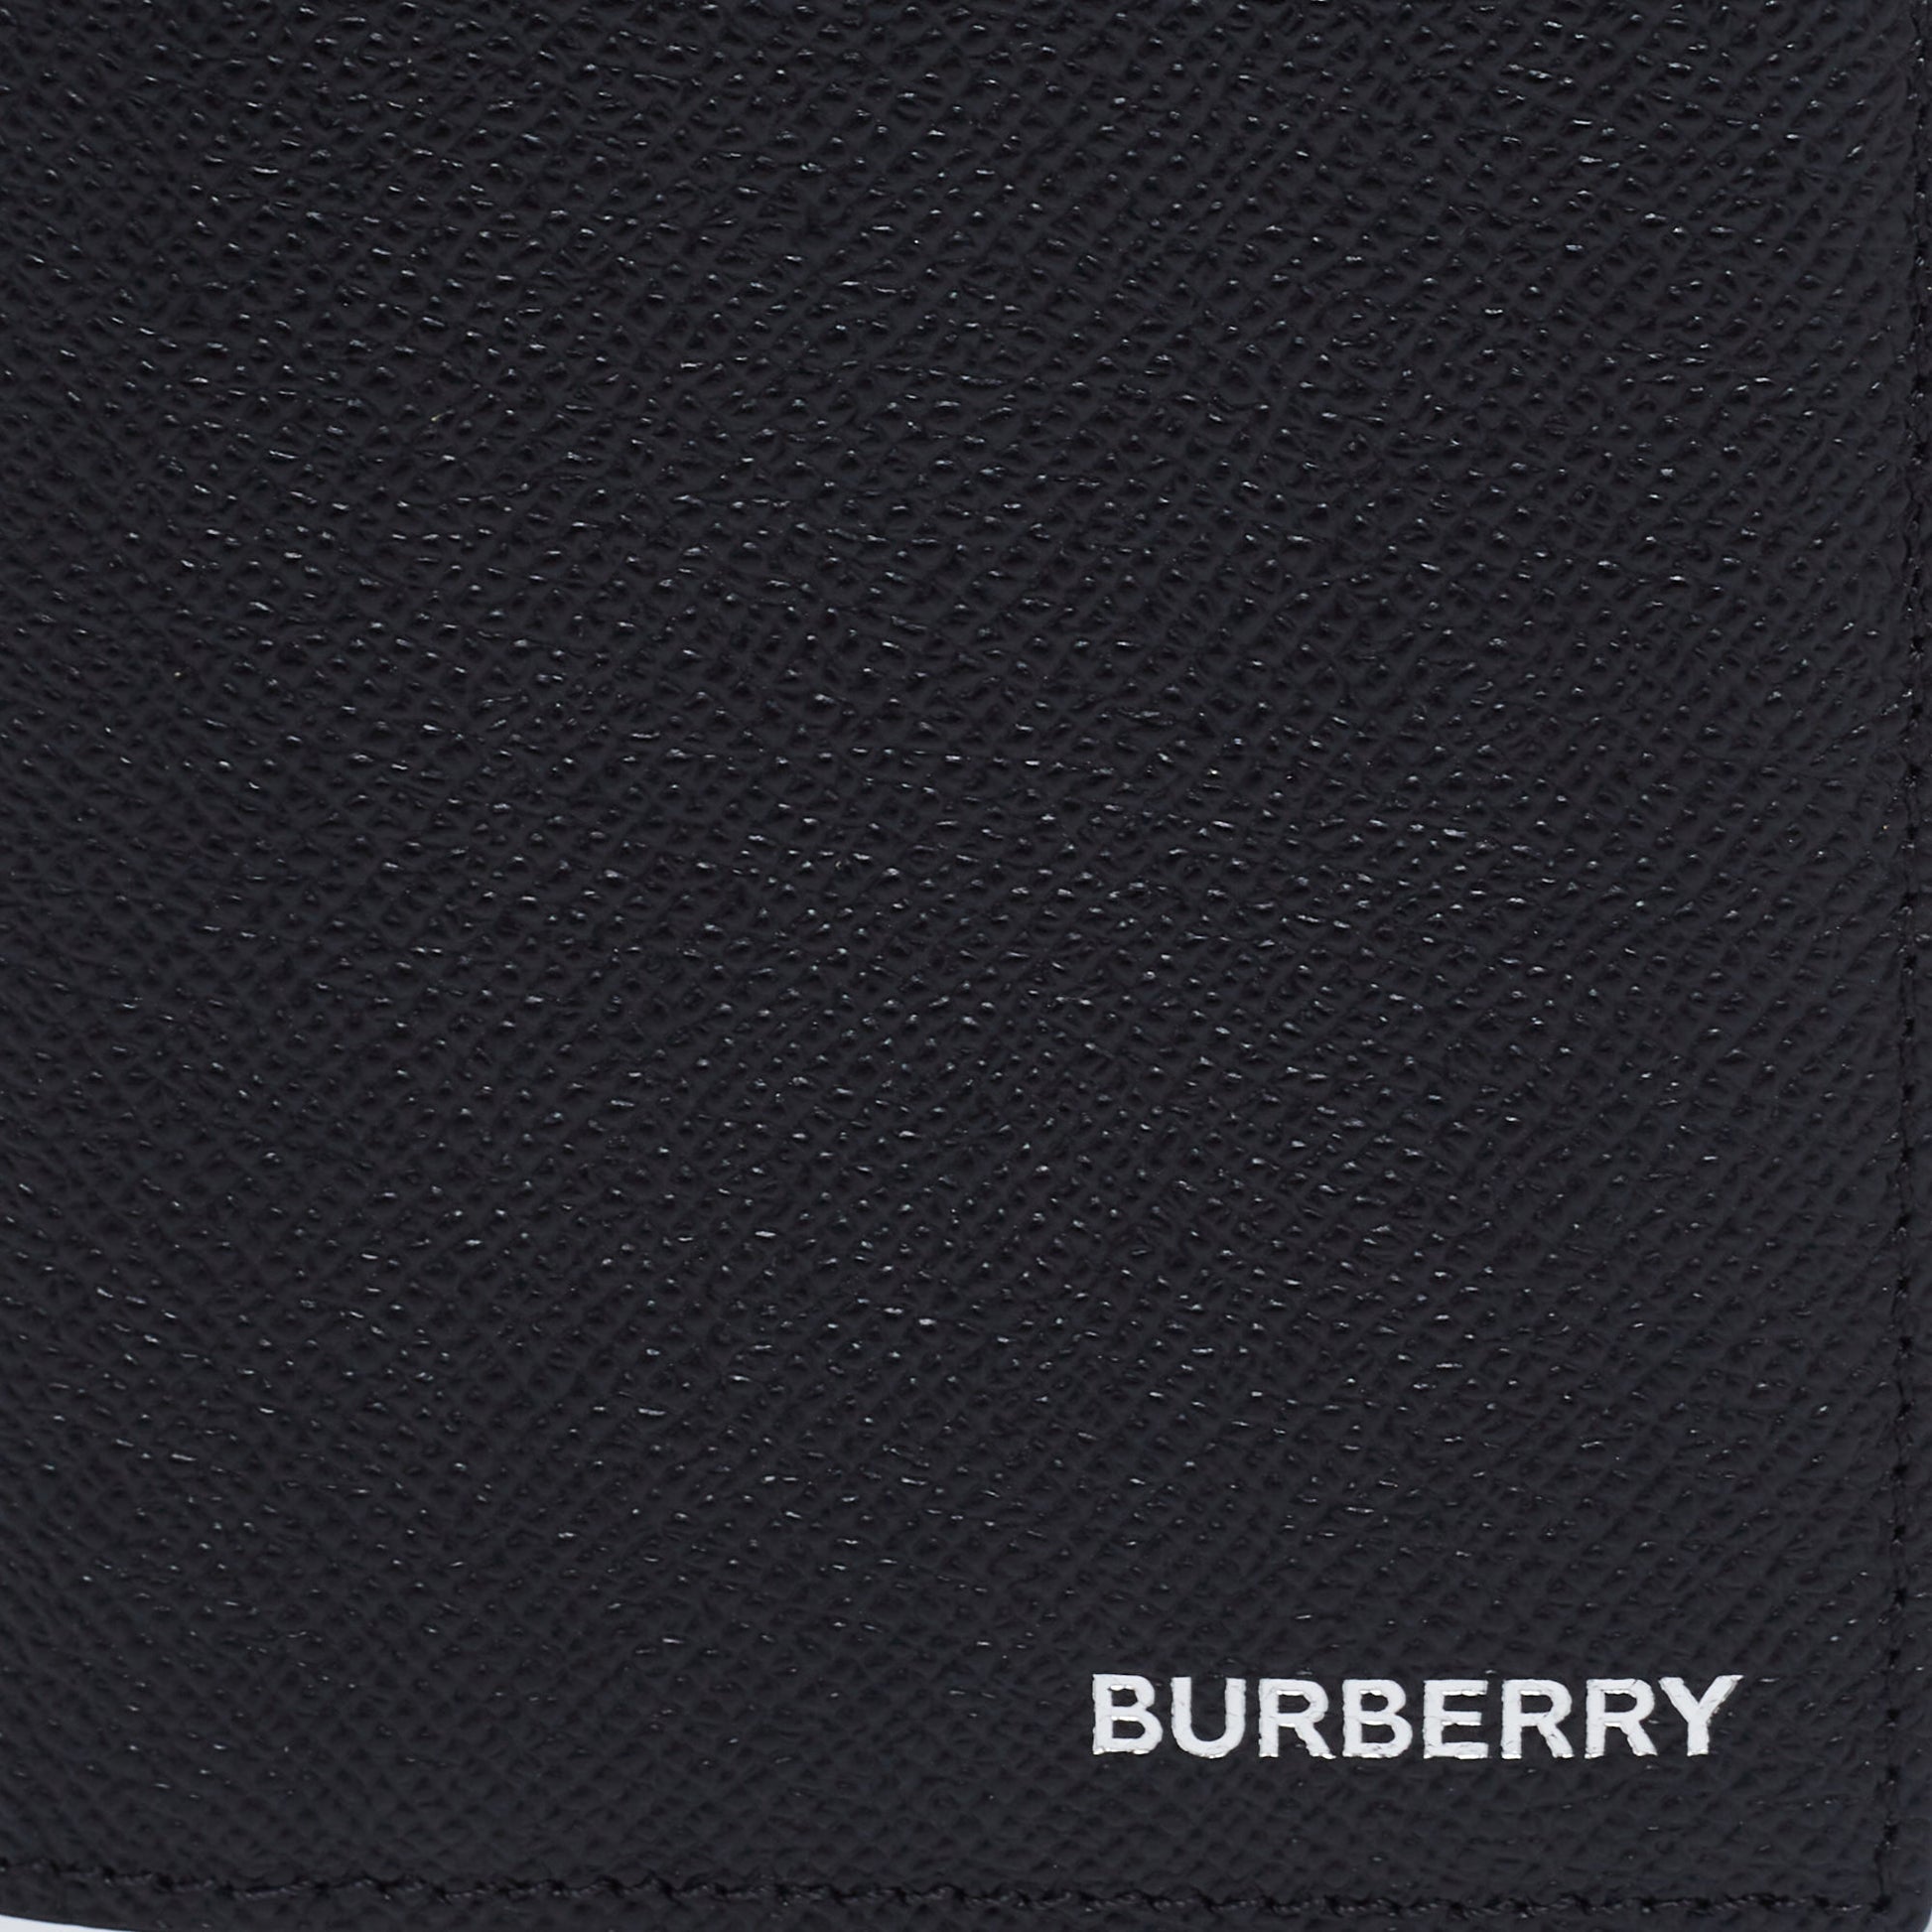 BRAND NEW BURBERRY BLACK LEATHER BIFOLD LONG WALLET 8052834